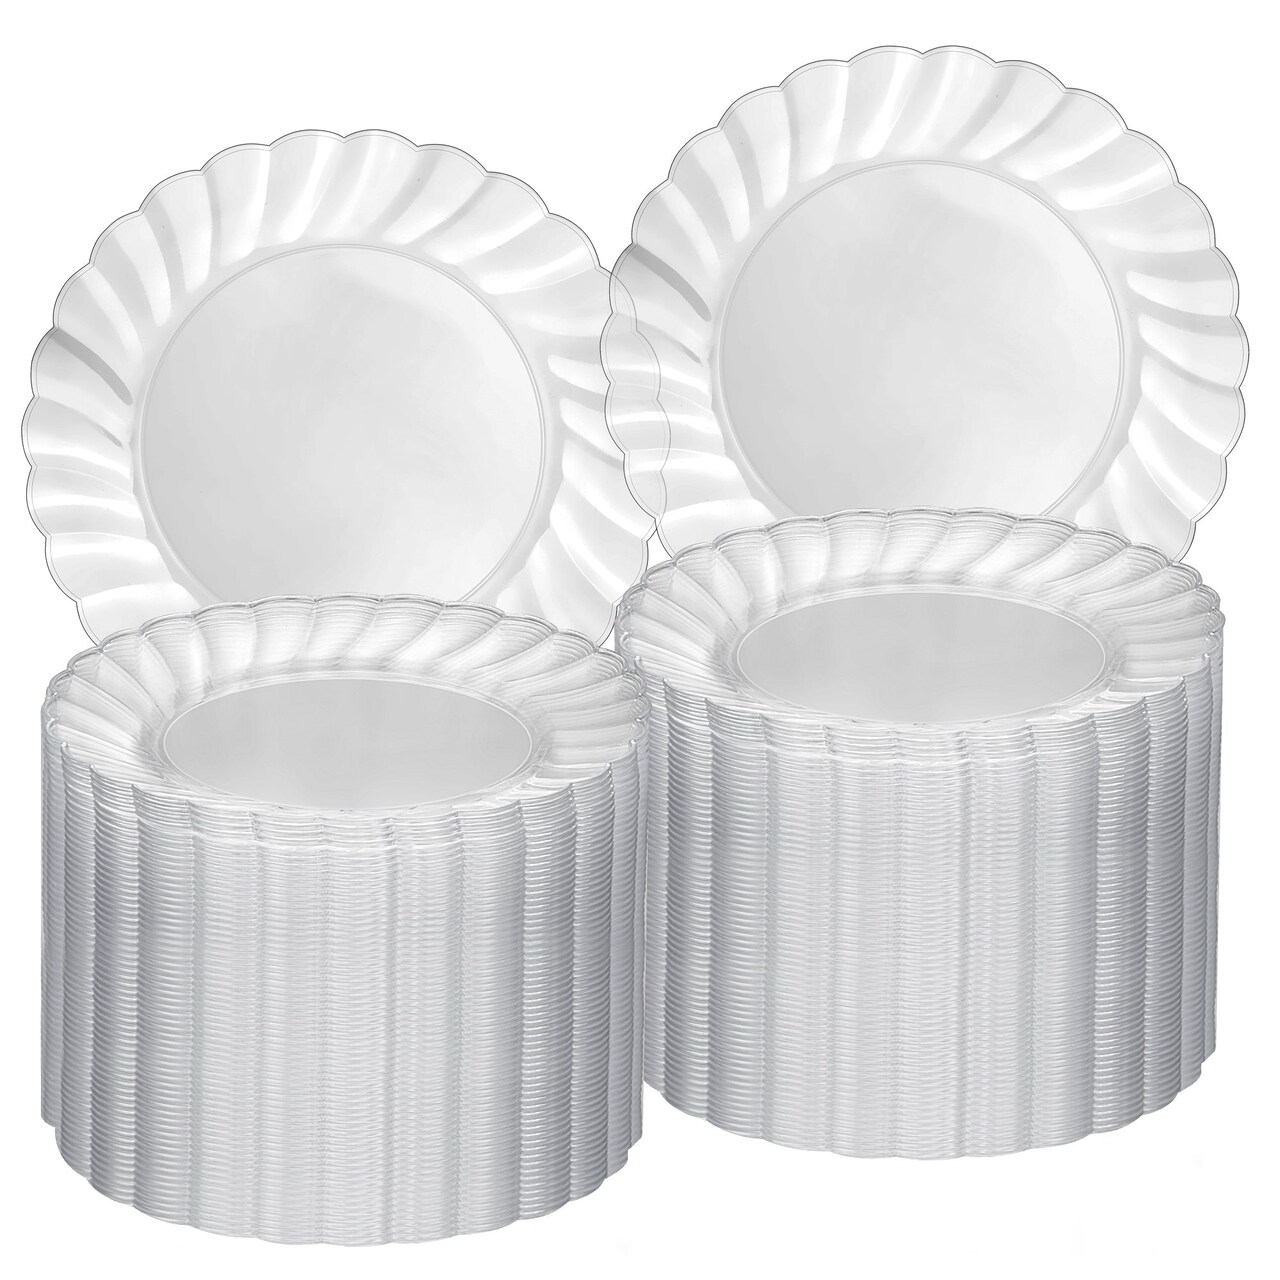 100 Pack 6 Inch Clear Disposable Plastic Plates - Dessert, Salad,  Appetizers or Snacks